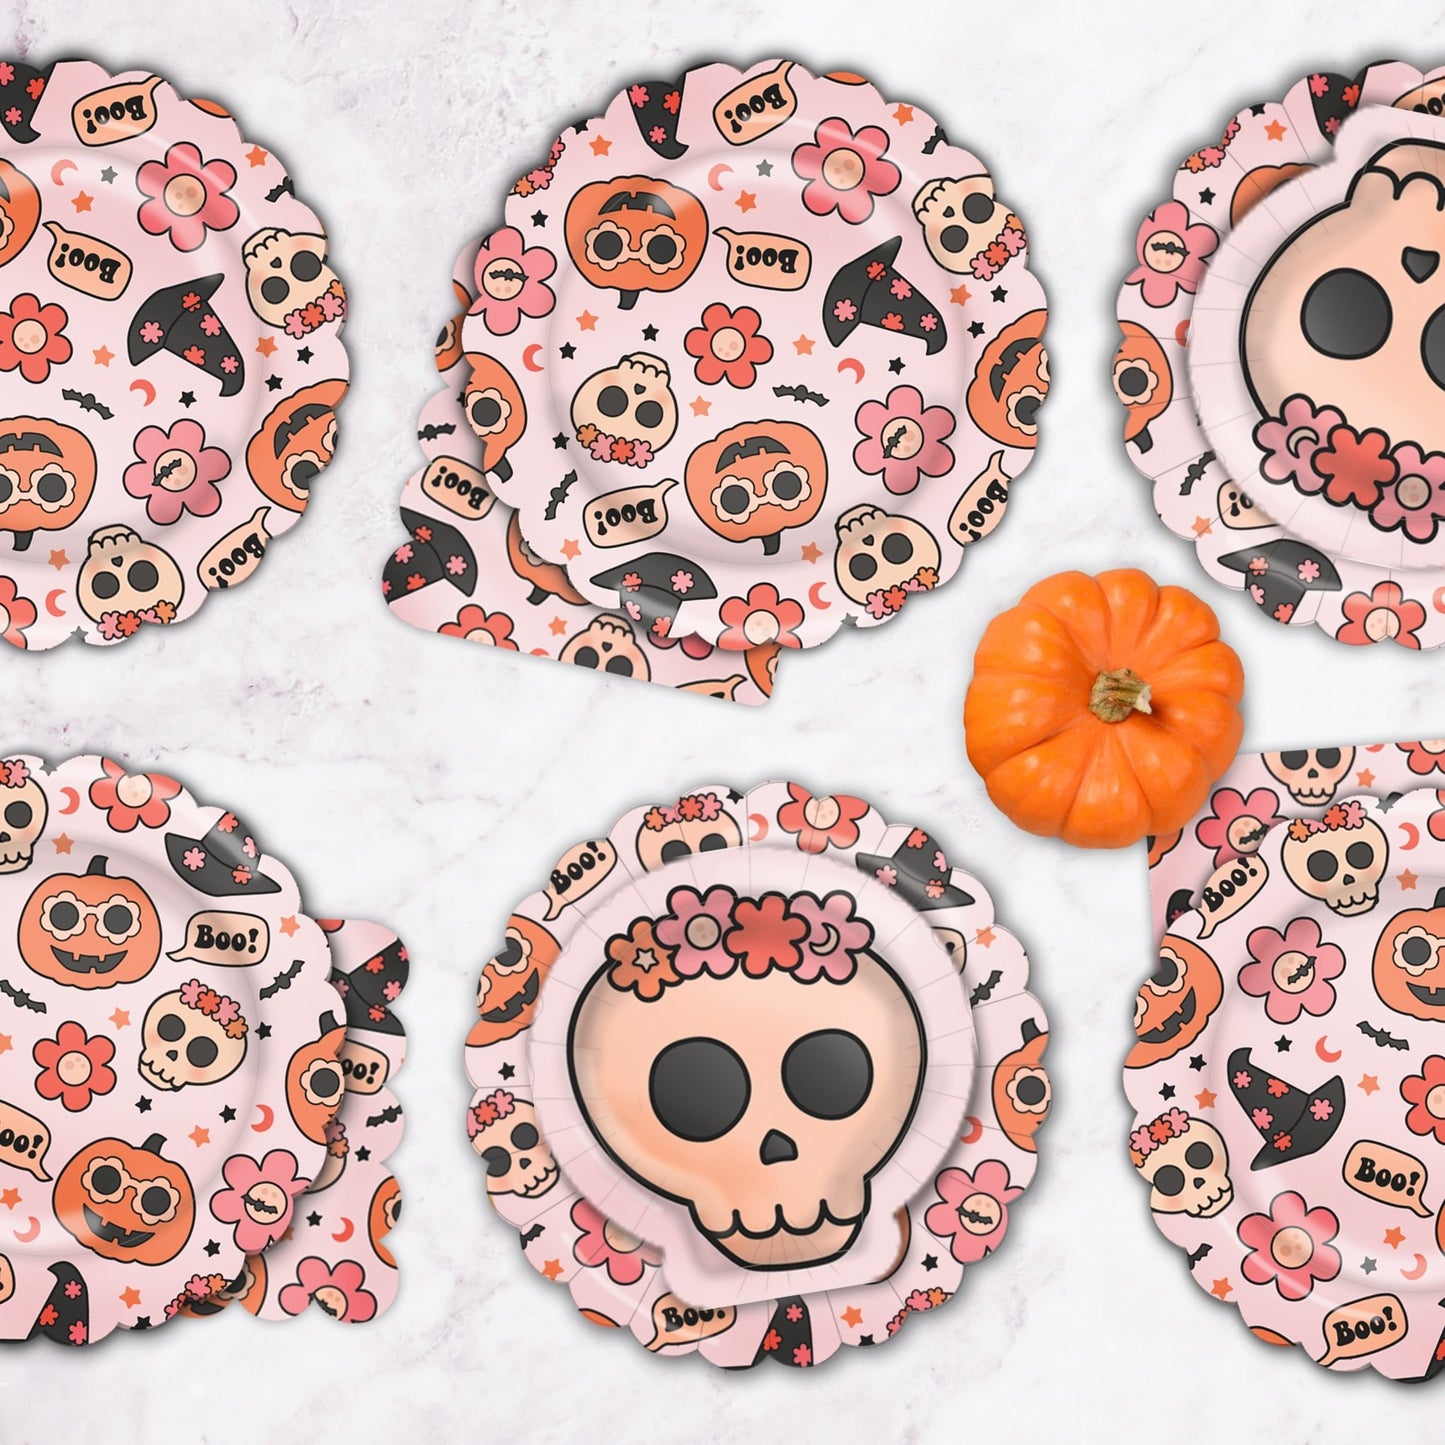 Groovy Halloween Icon Napkins (Set of 16) - Ellie's Party Supply